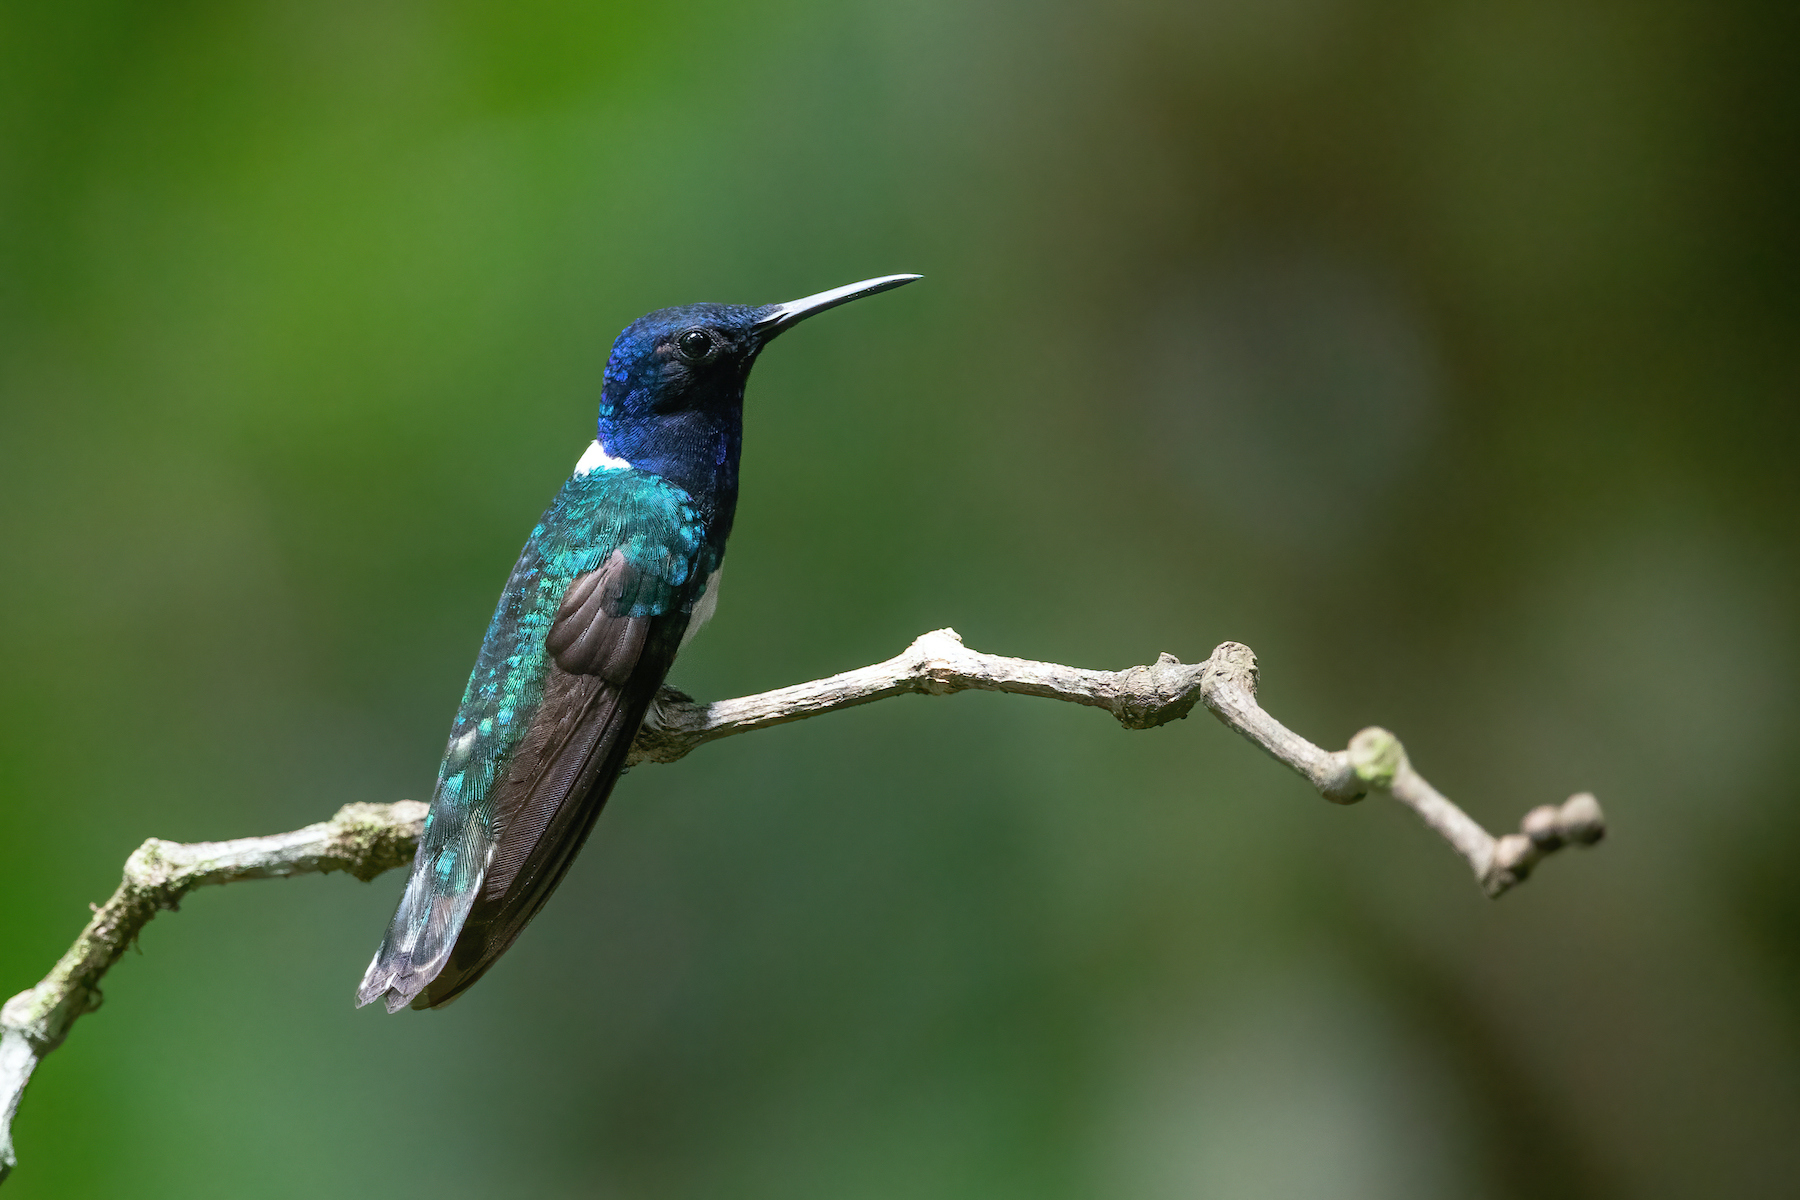 White-necked Jacobins are just one of many stunning hummingbird species we will photograph on tour